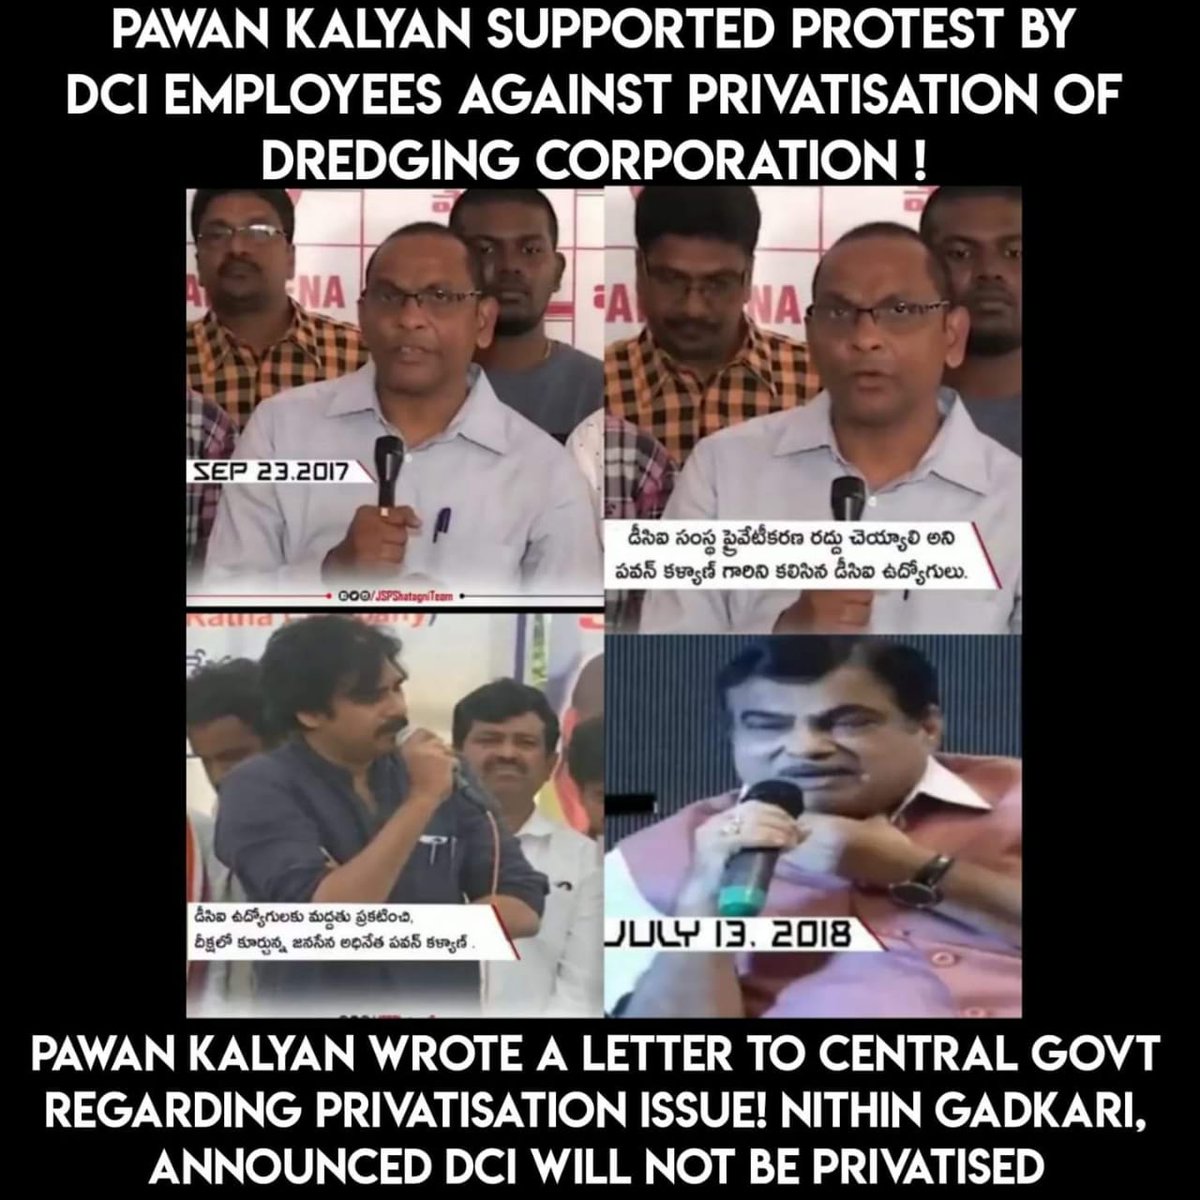 15. Pawankalyan Supported protest BY DCI employees against Privatisation Dredging corporation..